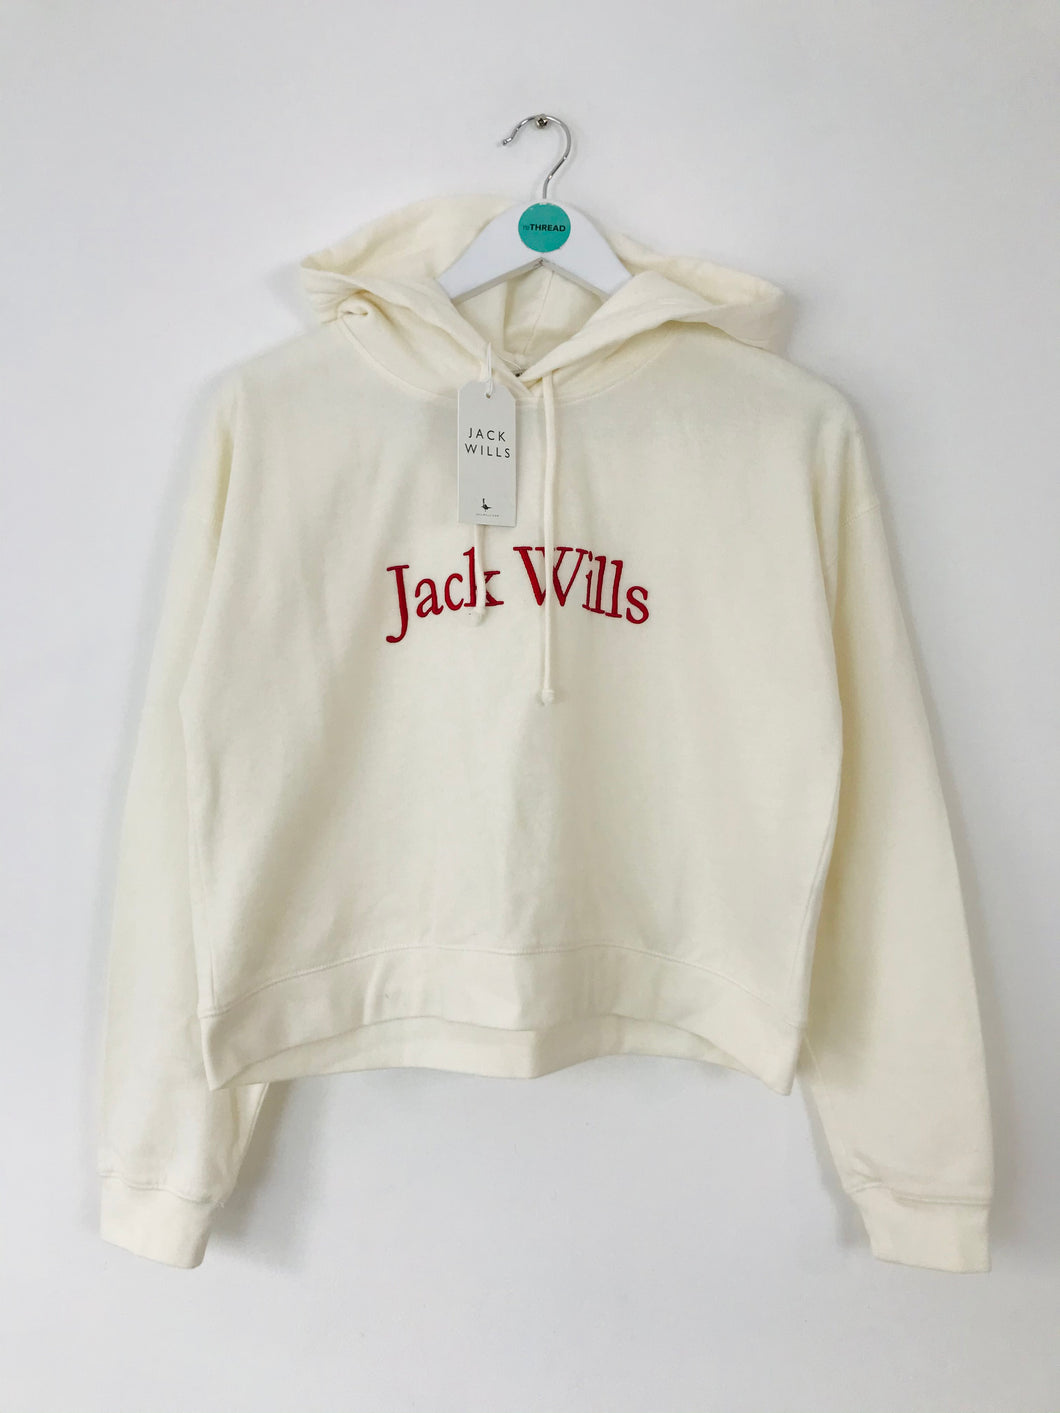 Jack Wills Women’s Fleece Lined Hoodie With Tags | UK12 | White